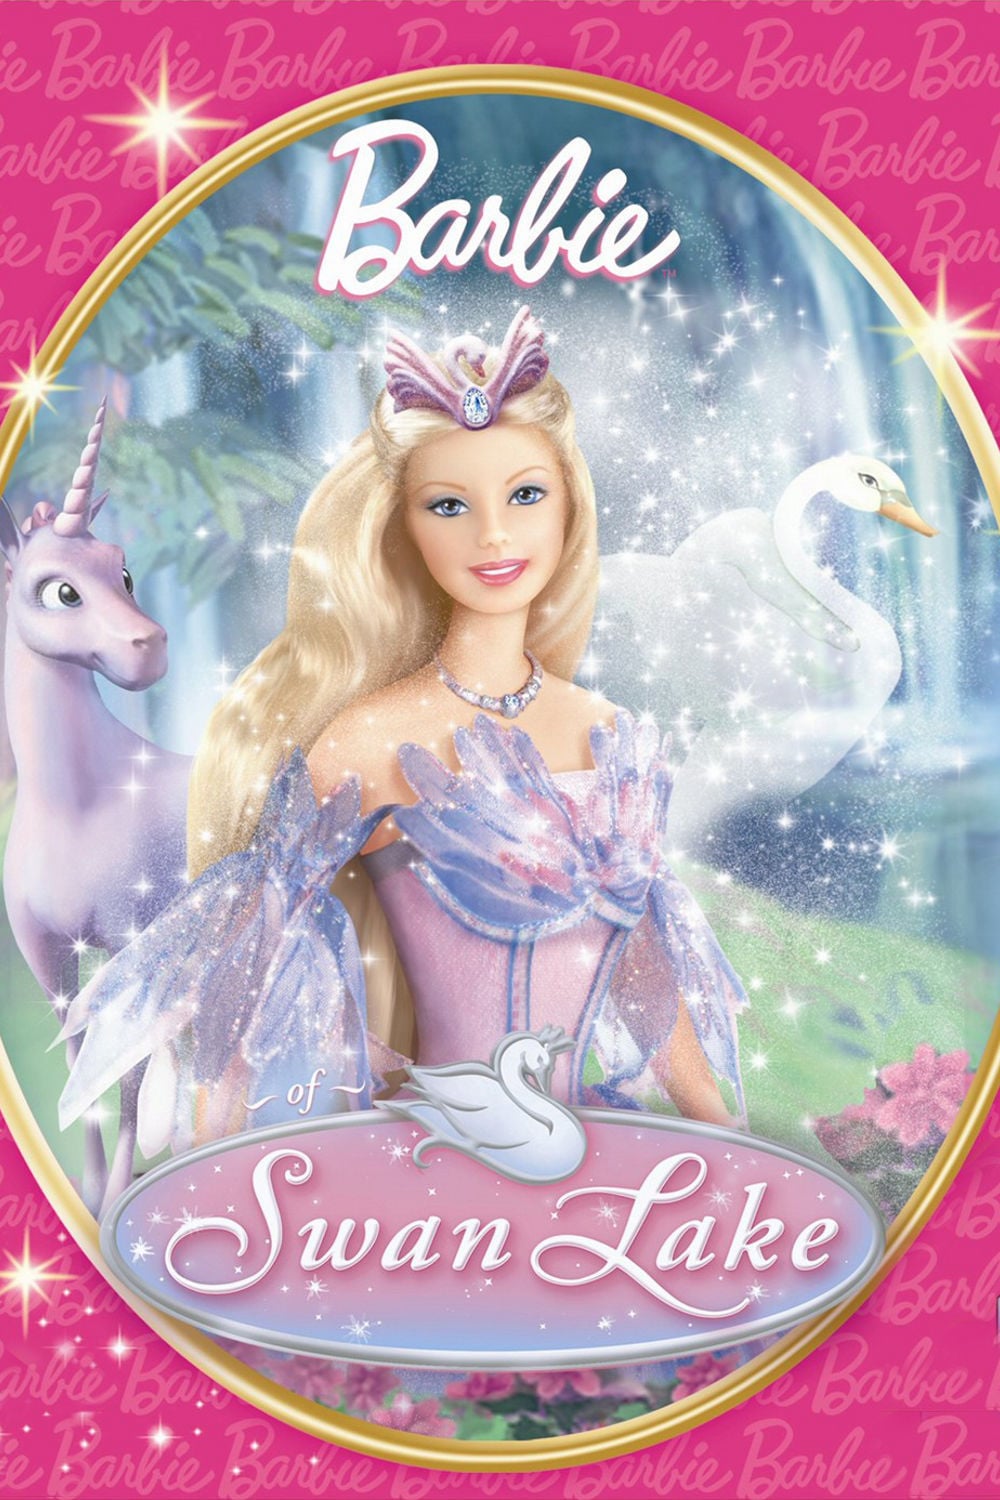 Barbie of Swan Lake Picture